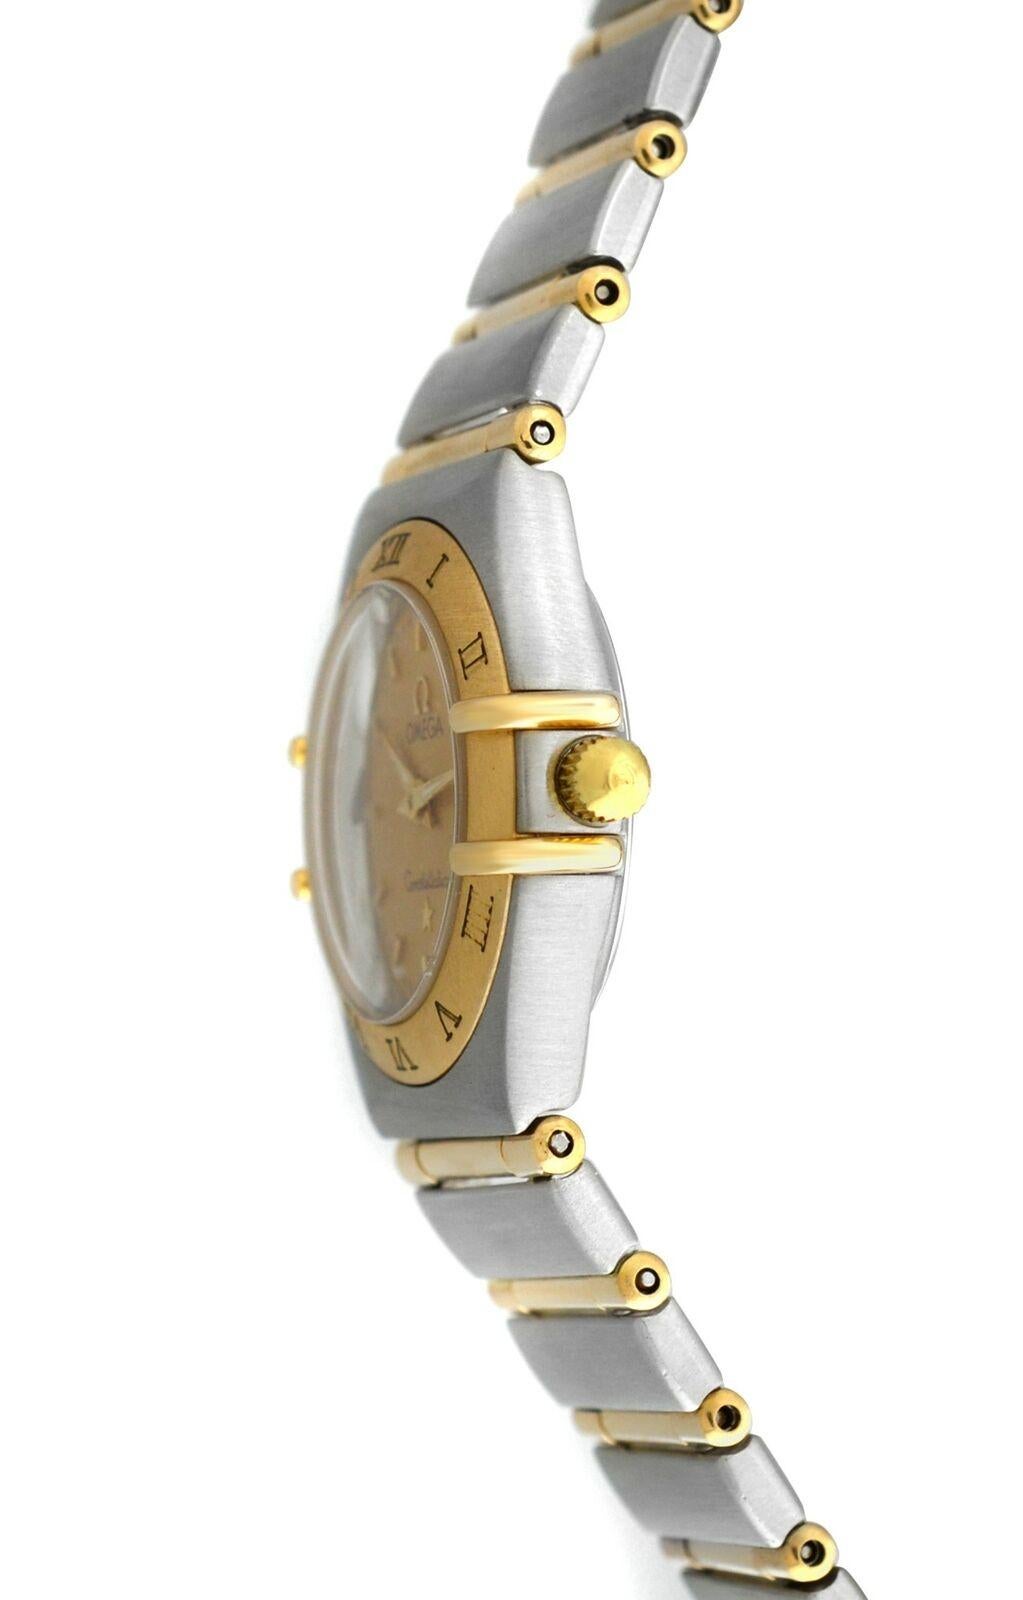 
Brand	Omega
Model	Constellation 7951203 
Gender	Ladies
Condition	Pre - Owned
Movement	Quartz
Case Material	18K Yellow Gold & Stainless Steel
Bracelet / Strap Material	18K Yellow Gold & Stainless Steel
Clasp / Buckle Material	Stainless Steel with